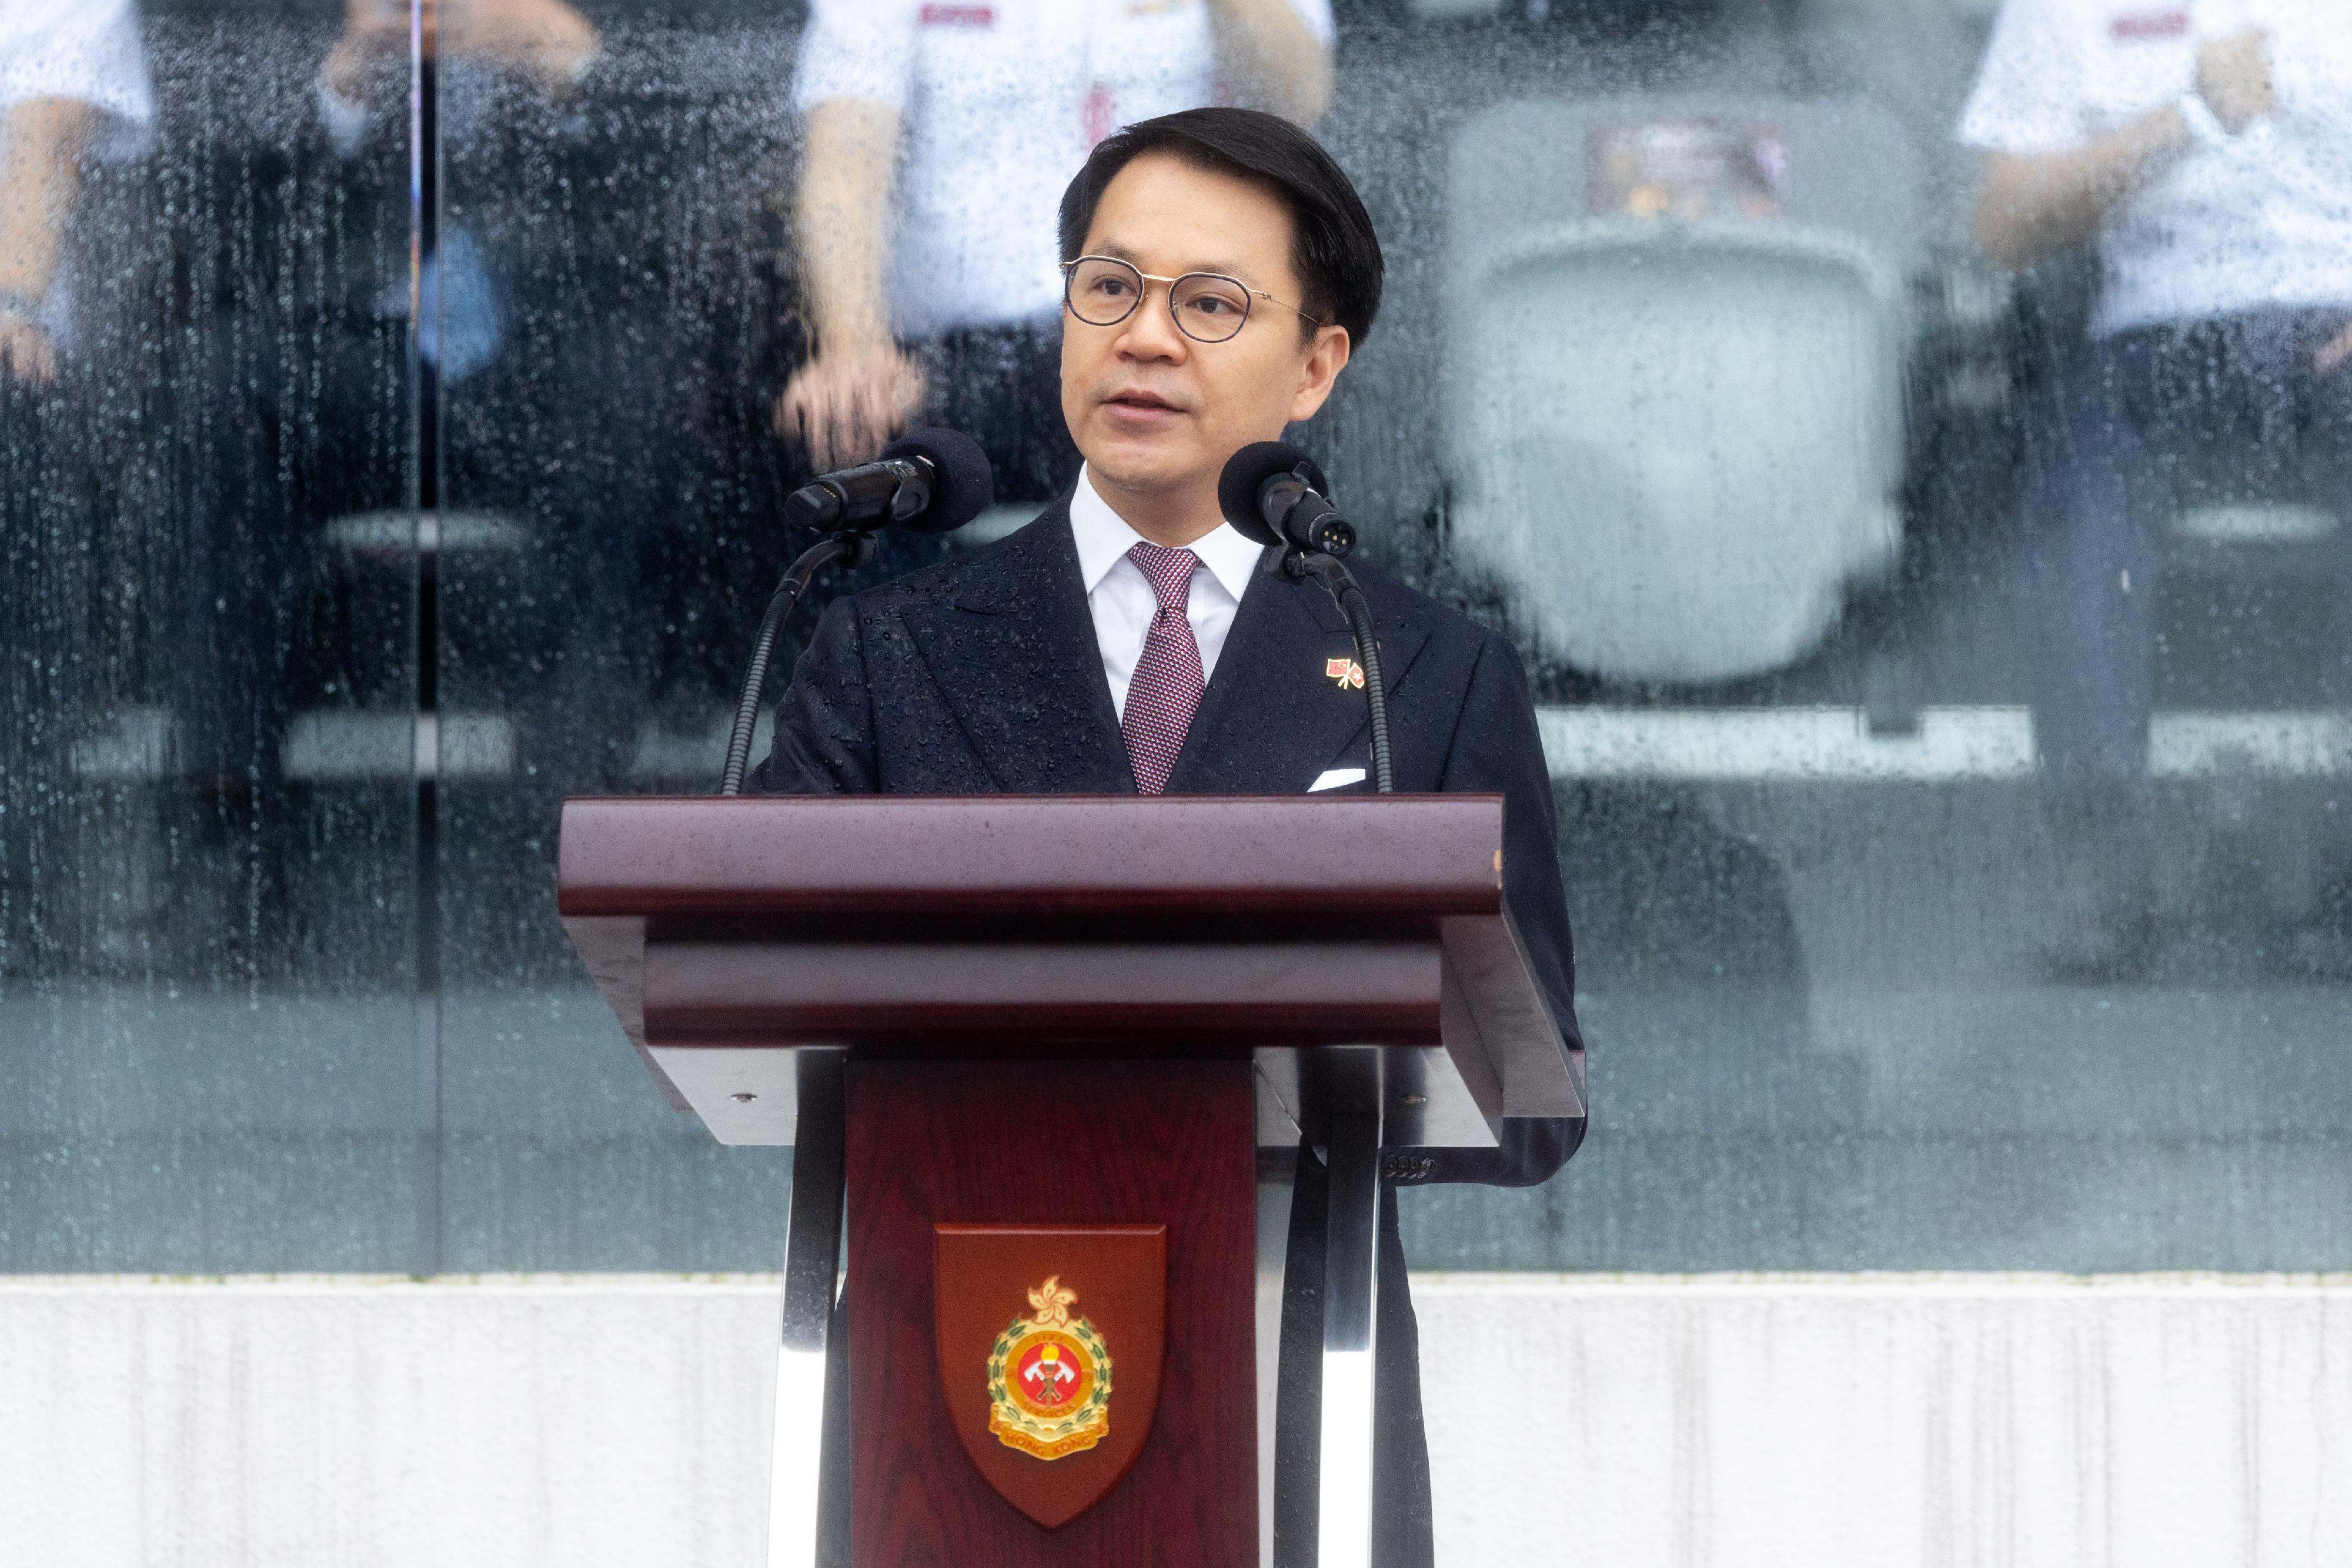 The Chairman of the Legislative Council Panel on Security, Mr Chan Hak-kan, reviewed the Fire Services passing-out parade at the Fire and Ambulance Services Academy today (May 24). Photo shows Mr Chan delivering a speech at the ceremony.